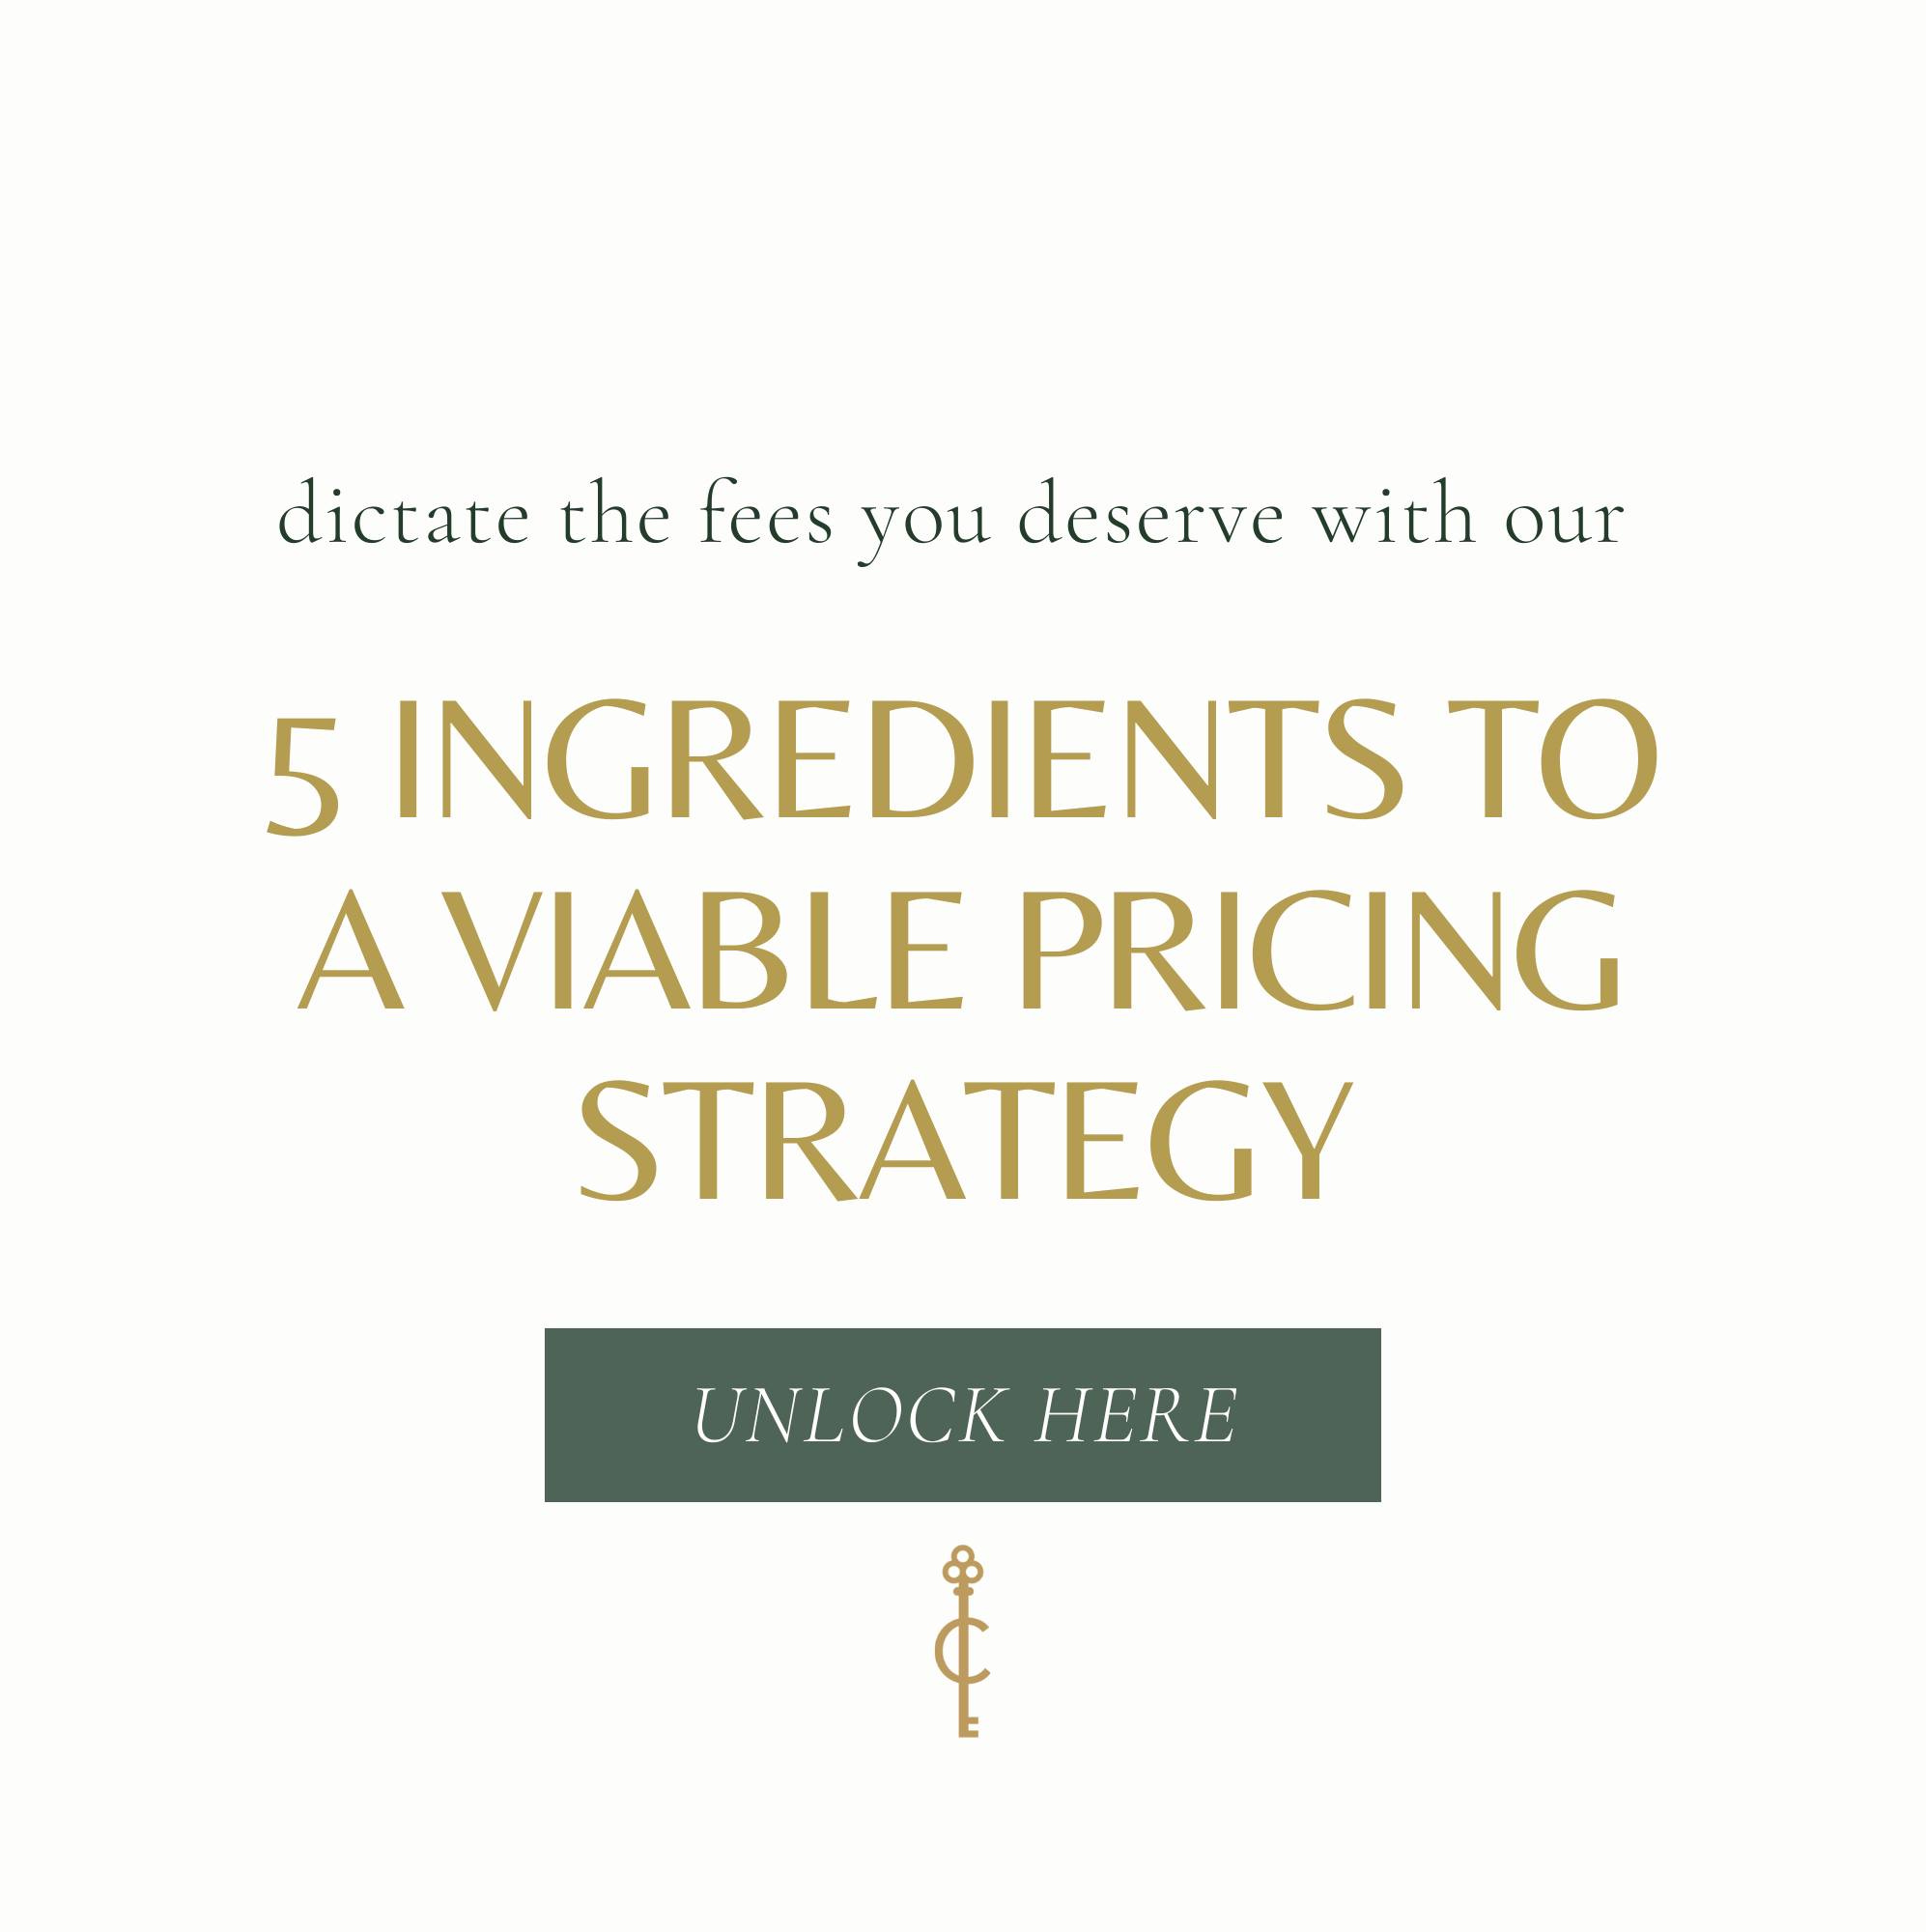 dictate the fees you deserve with our 5 ingredients to a viable pricing strategy. Unlock Here